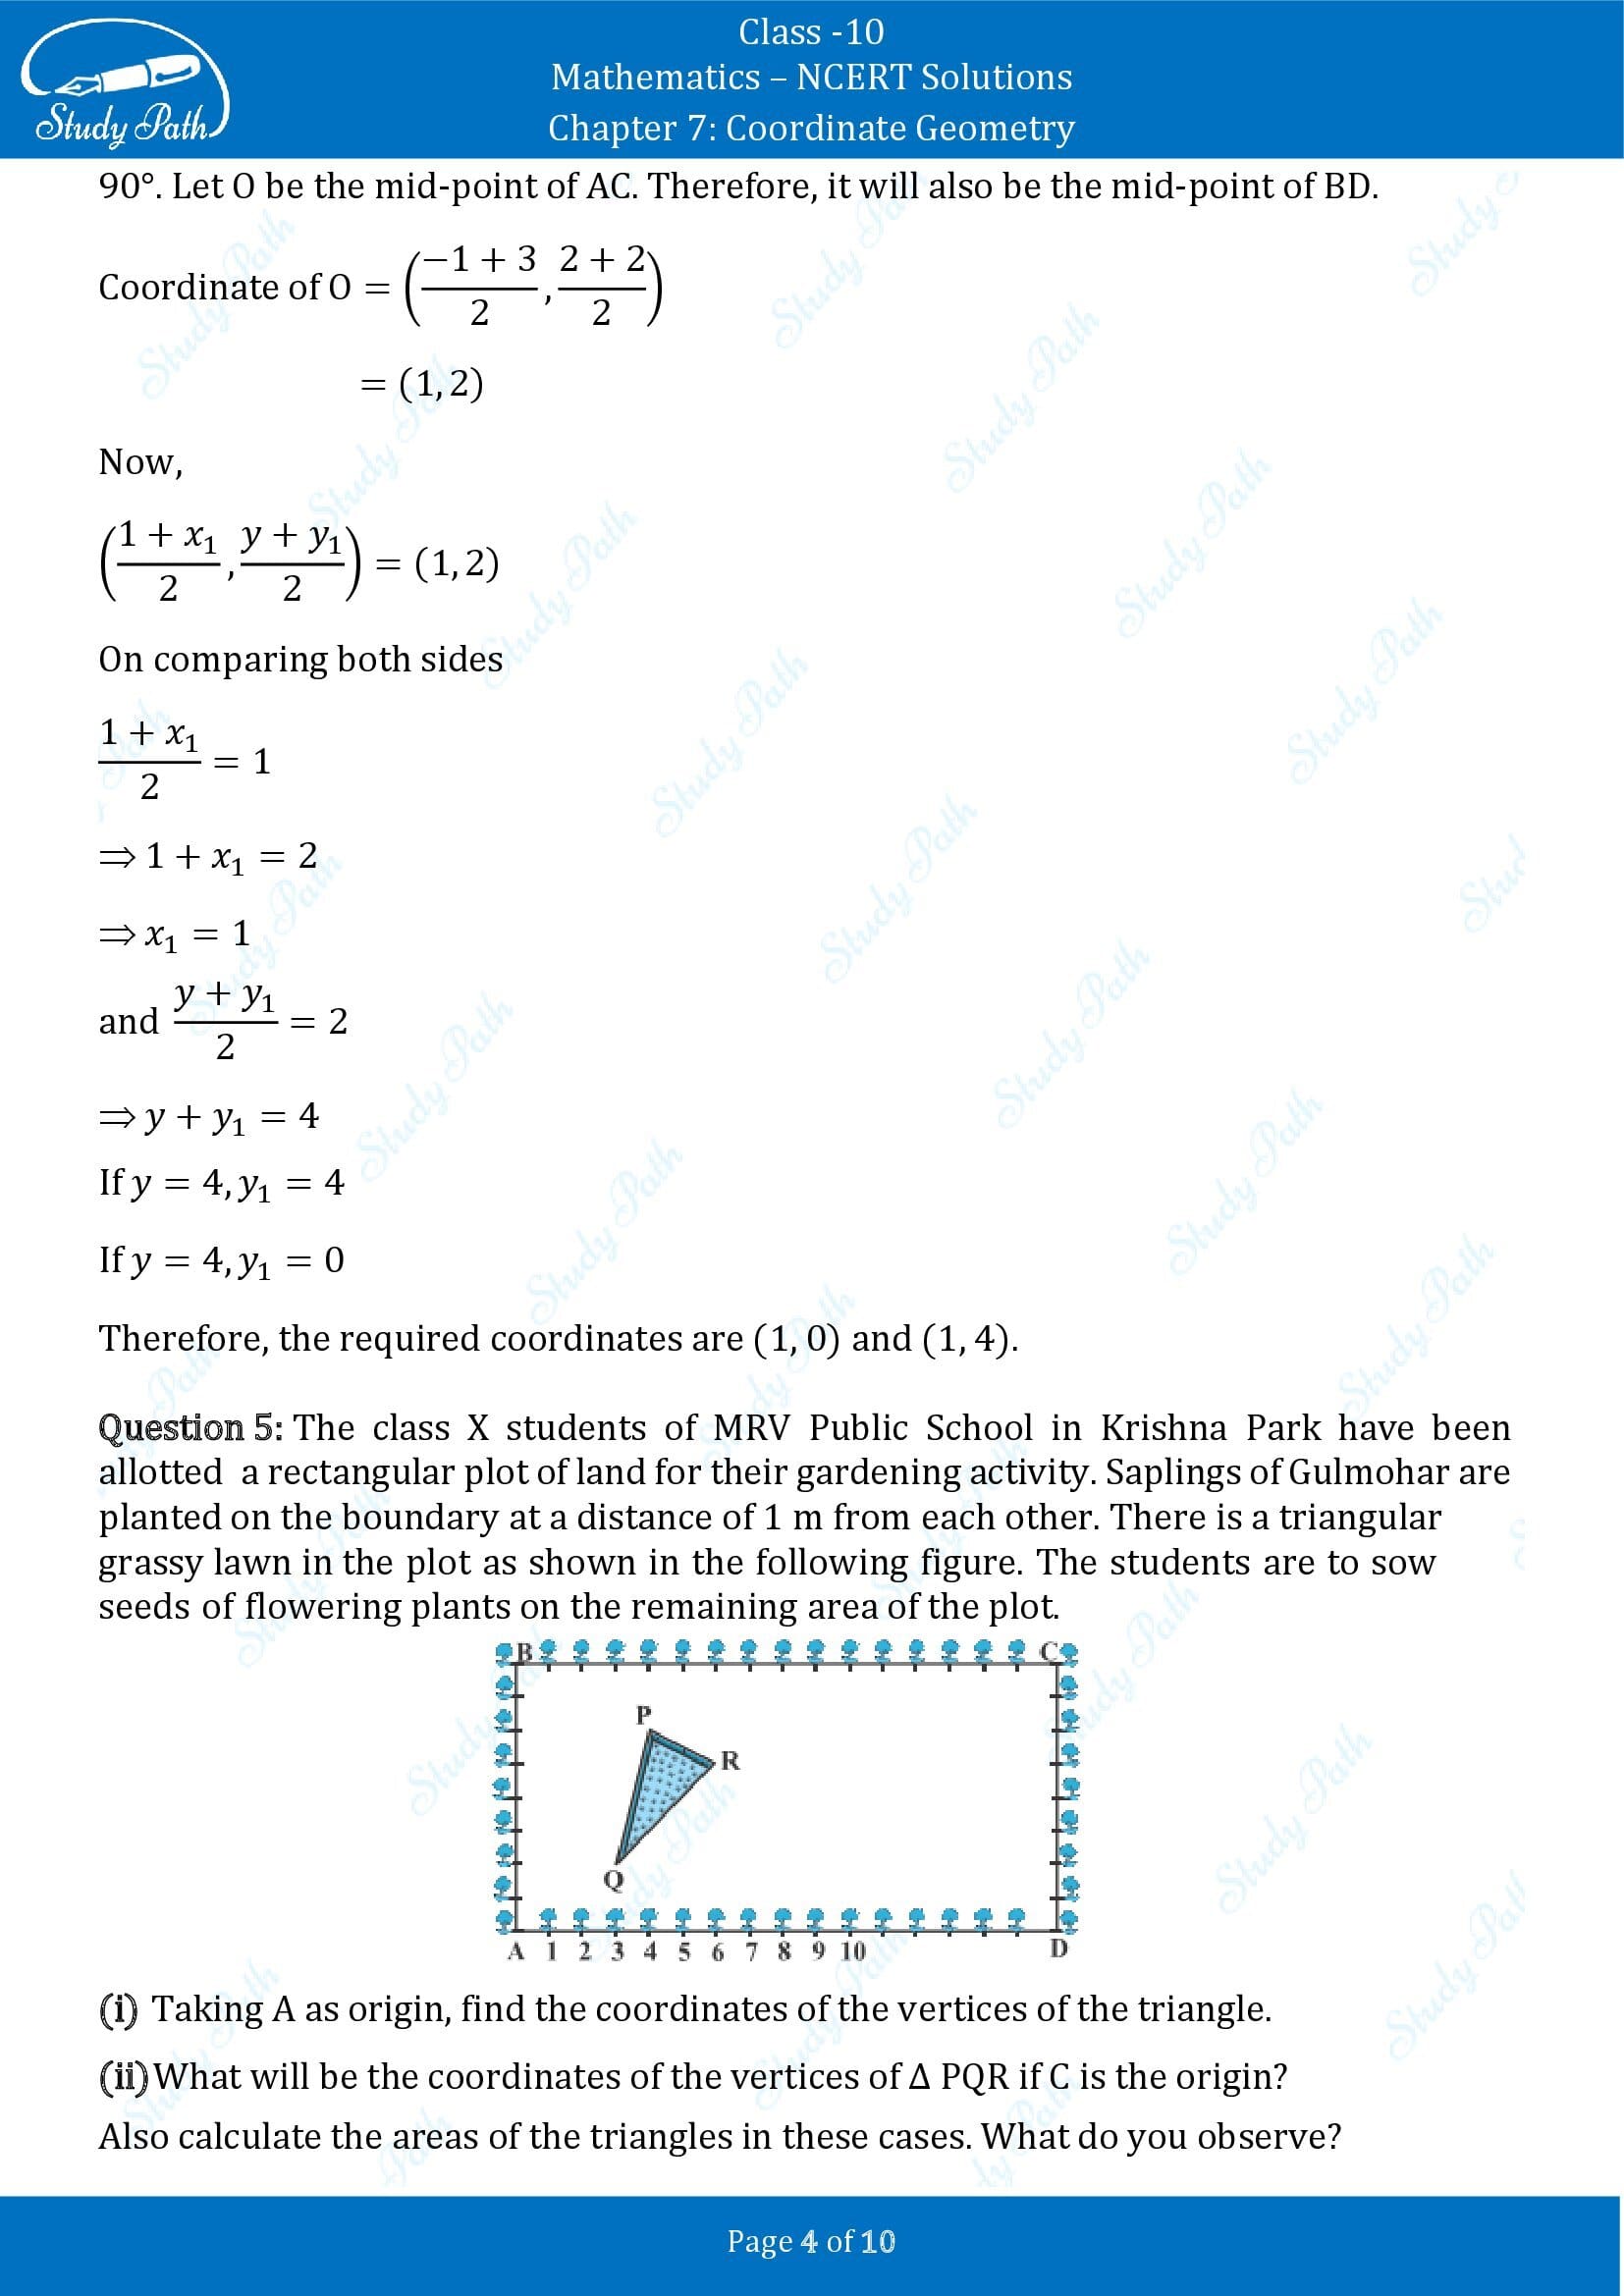 NCERT Solutions for Class 10 Maths Chapter 7 Coordinate Geometry Exercise 7.4 00004